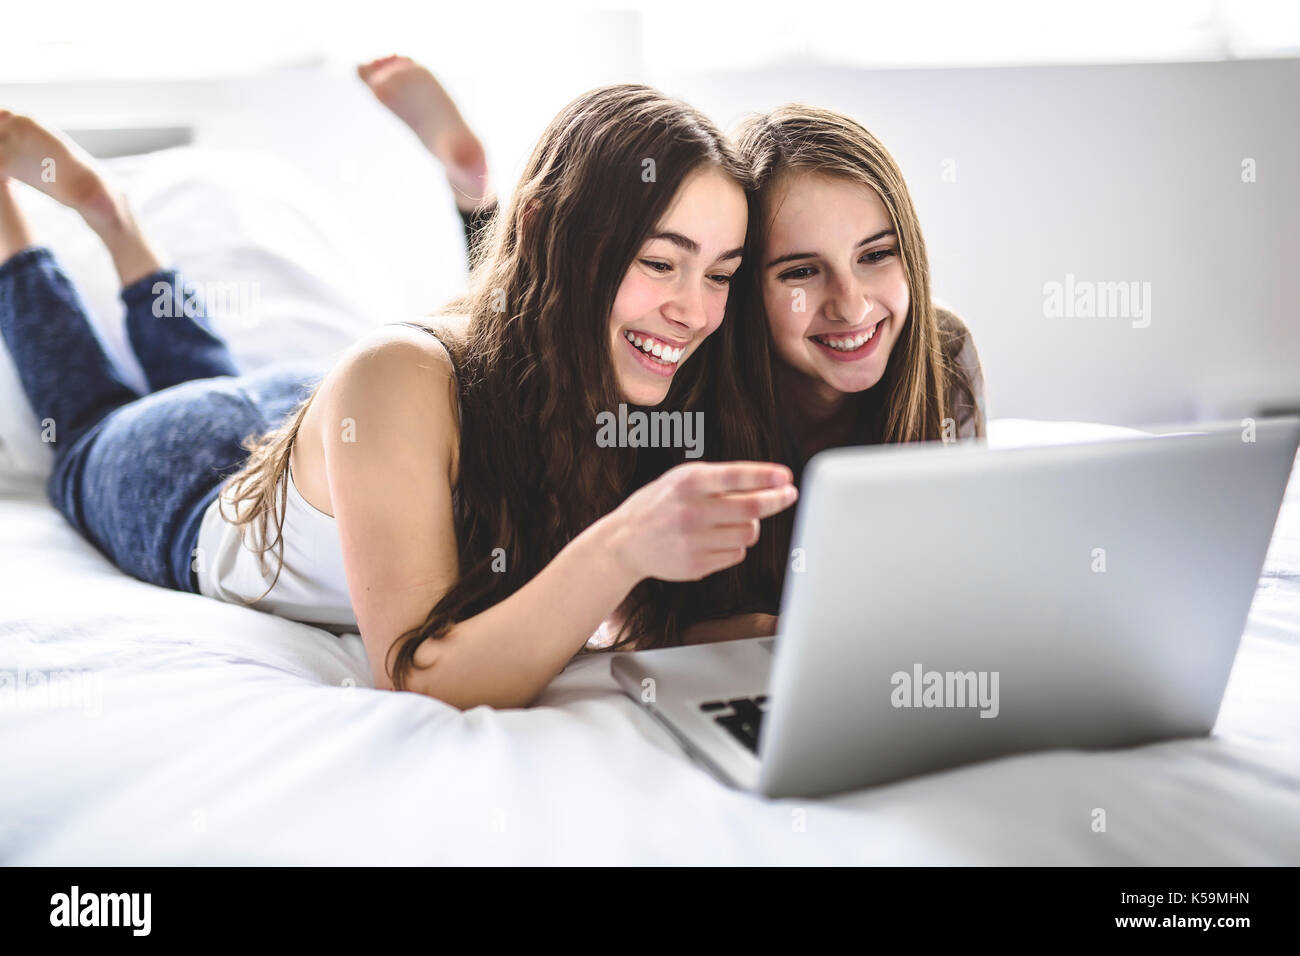 Teen Girls Lying On Bed Using A Laptop Stock Photo